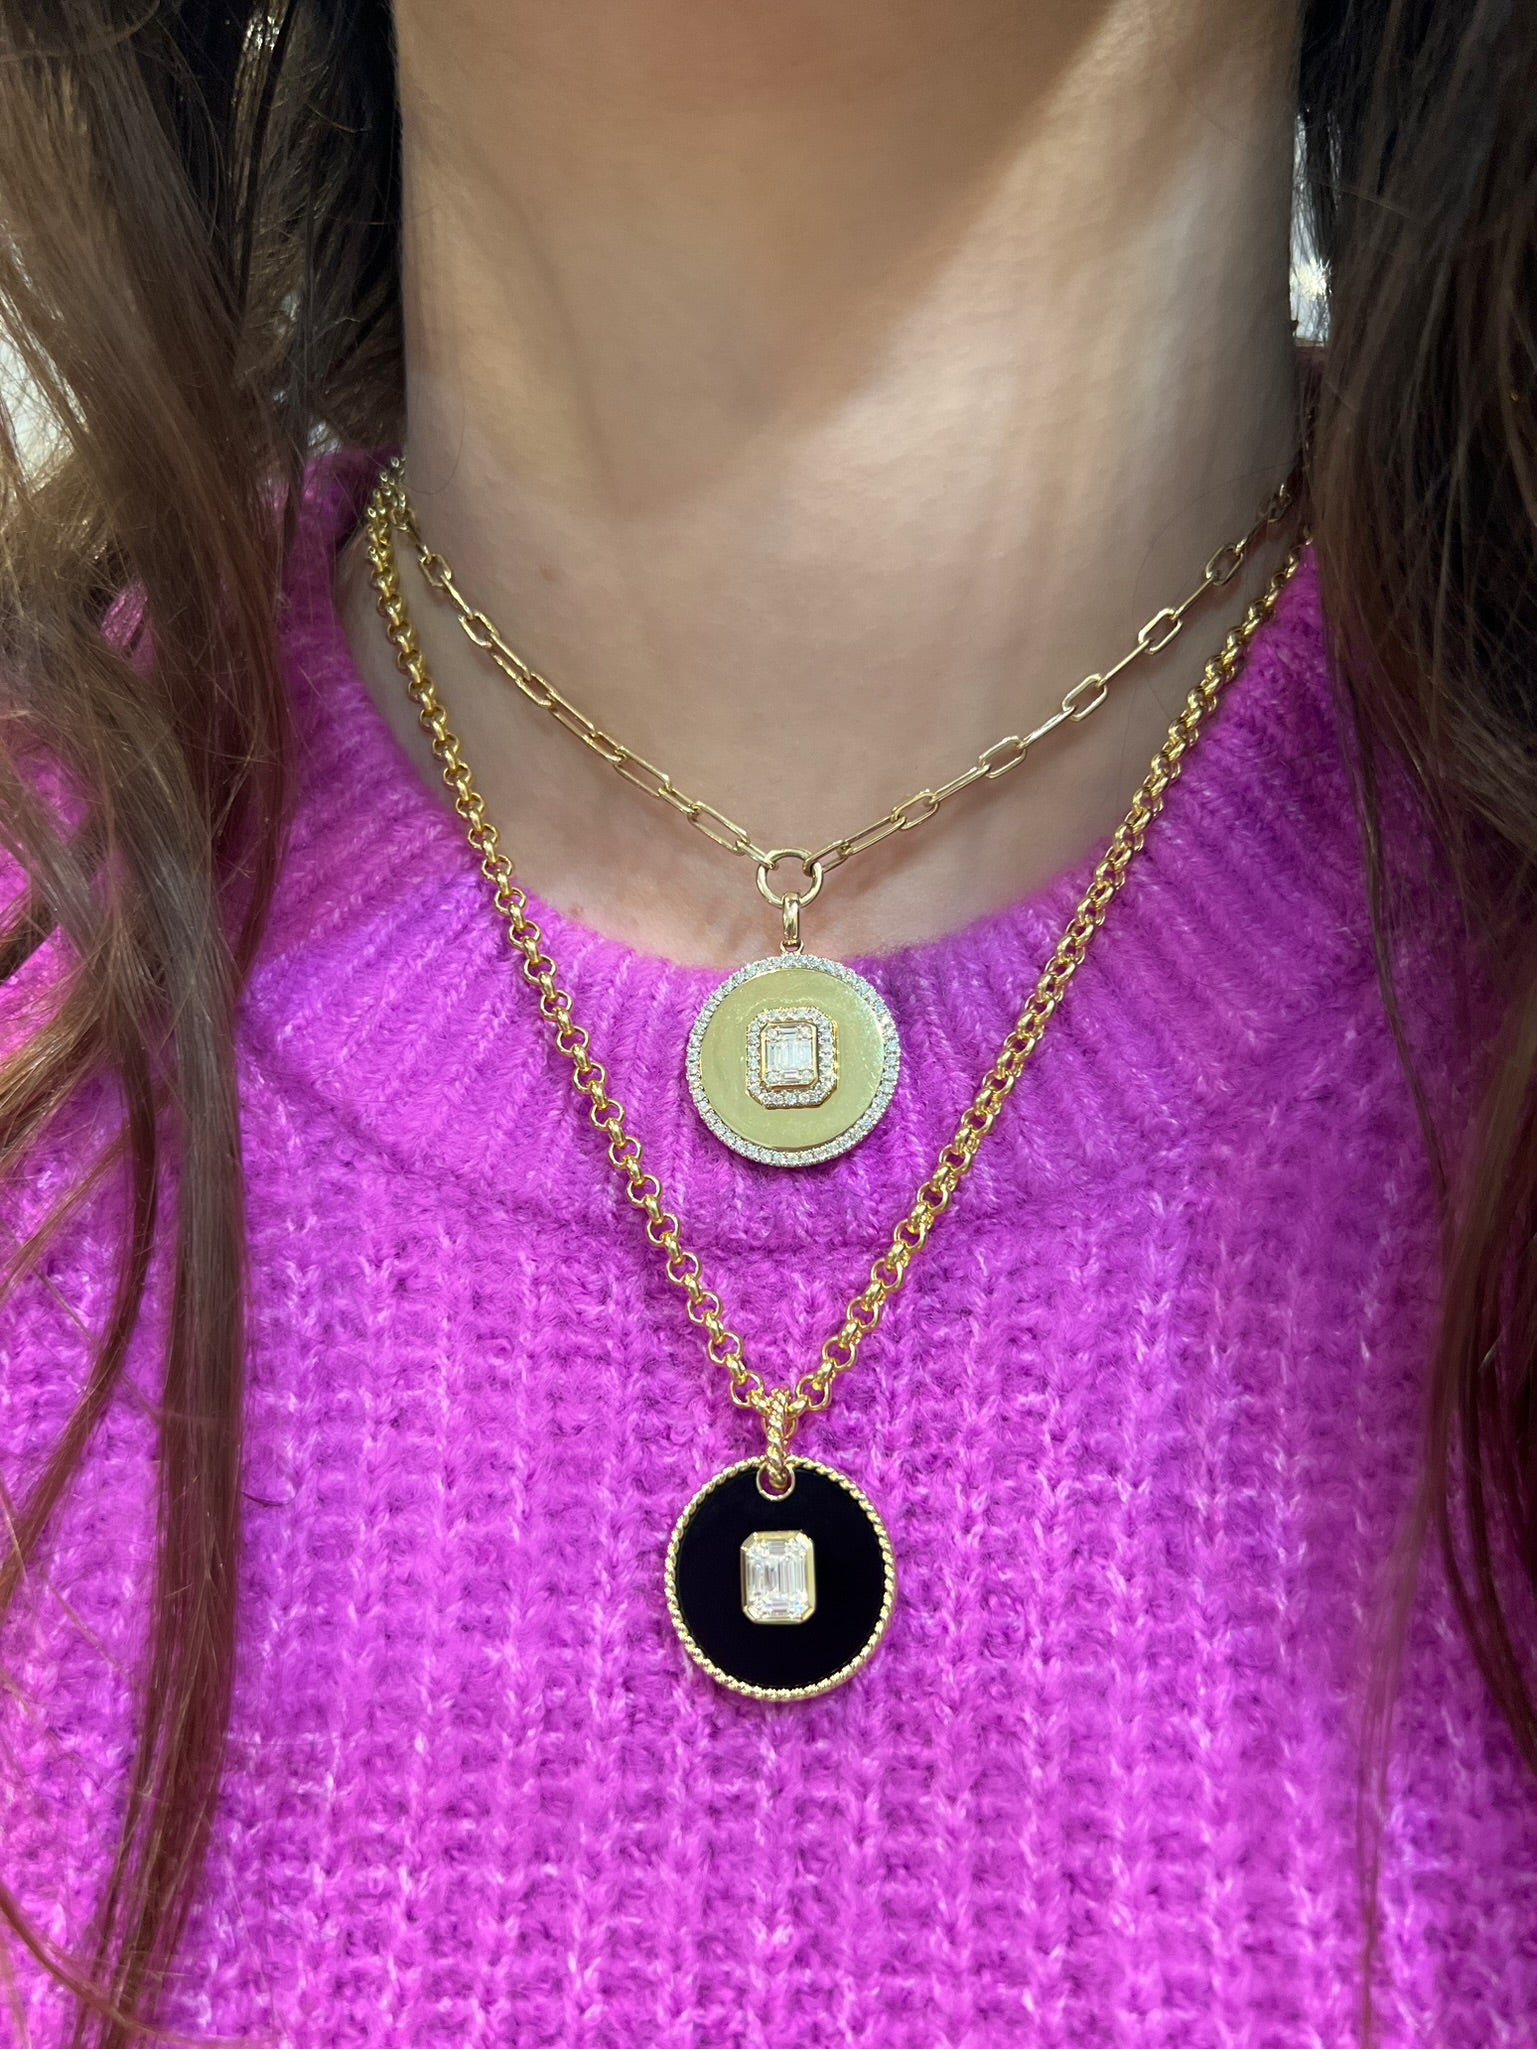 WD1251 14kt Gold Black Onyx Coin with Baguette Emerald Cut Diamond Necklace